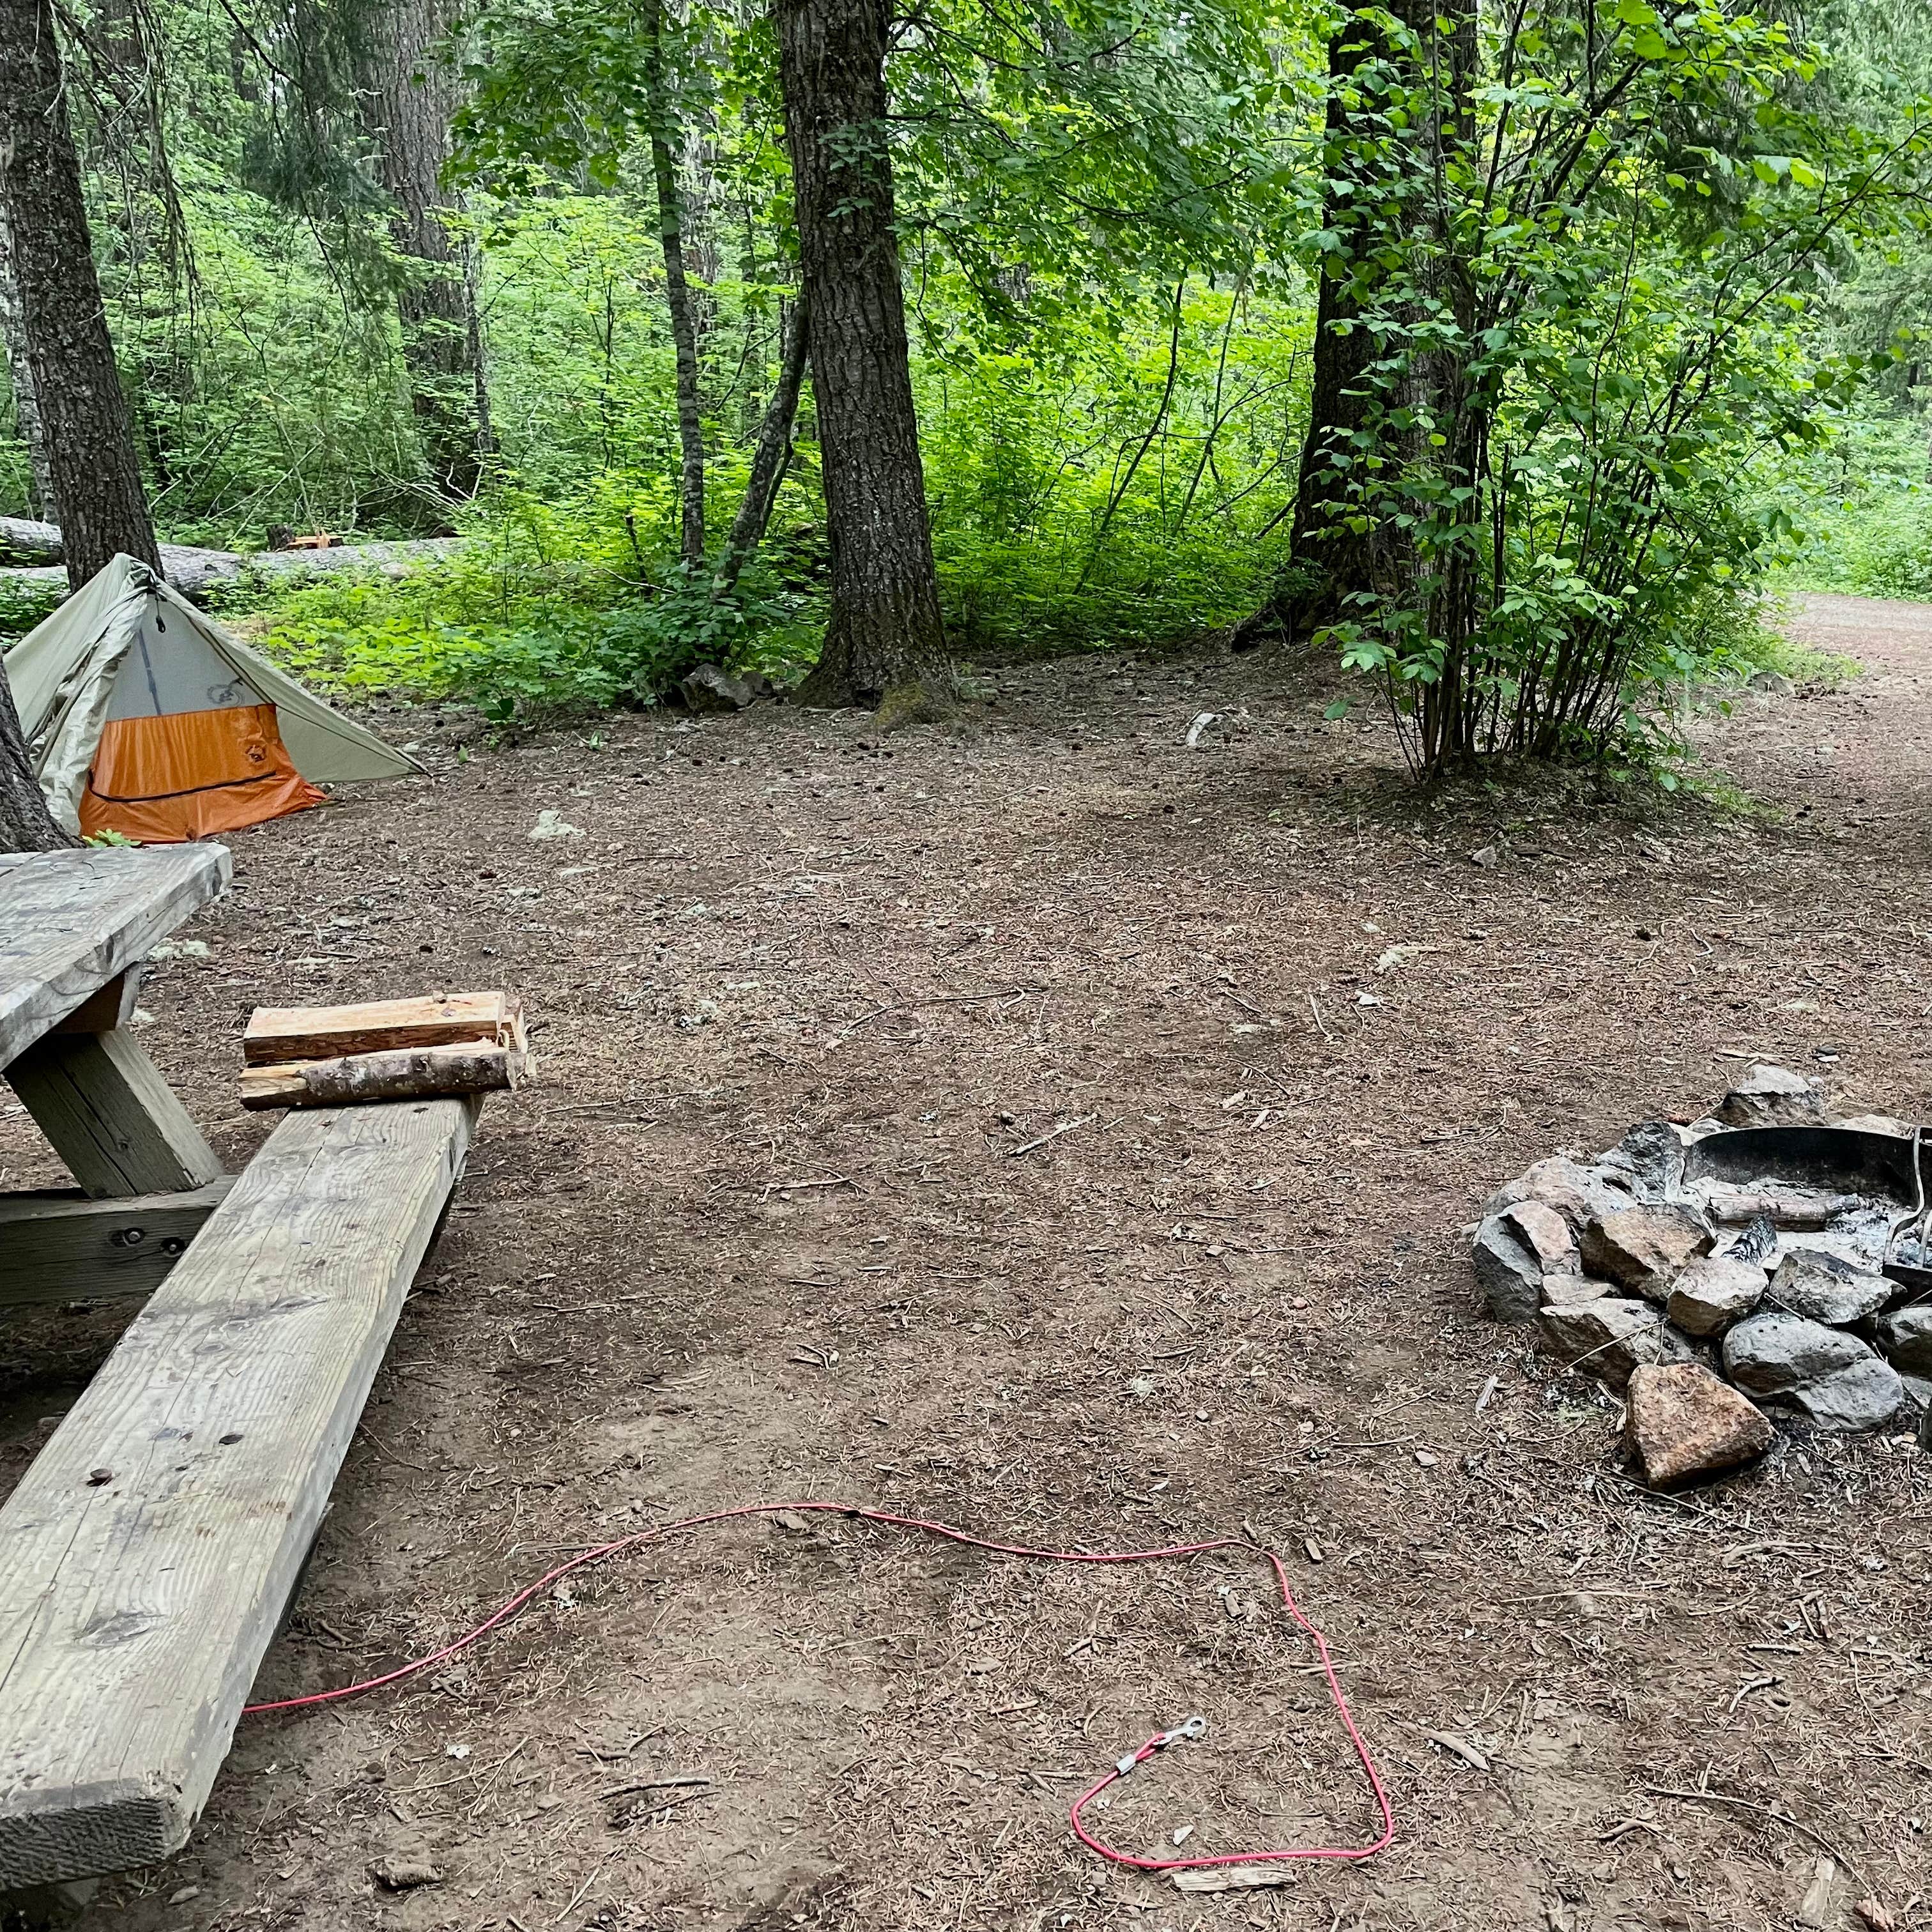 Camper submitted image from Gifford Pinchot National Forest Trout Lake Creek Campground - 5